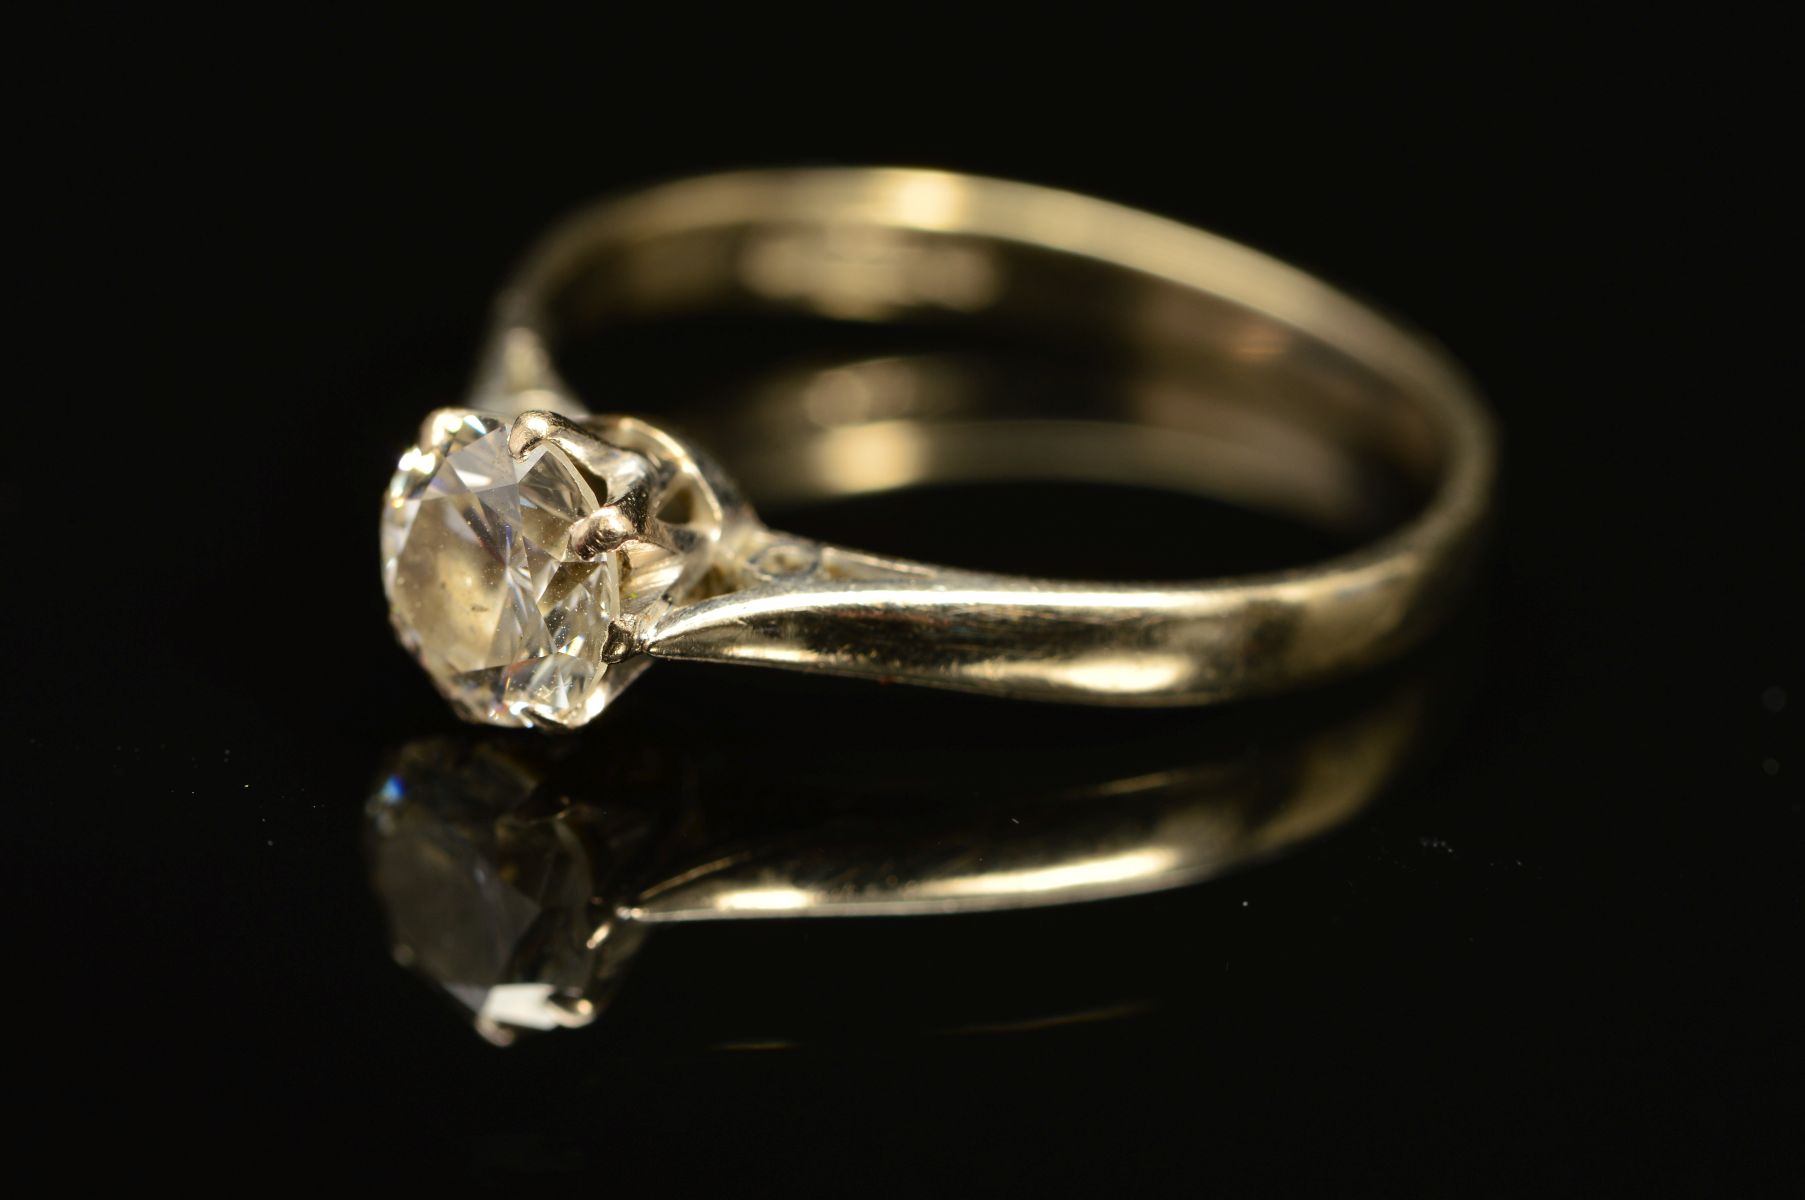 A MID TO LATE 20TH CENTURY 18CT WHITE GOLD SINGLE STONE DIAMOND RING, estimated modern round